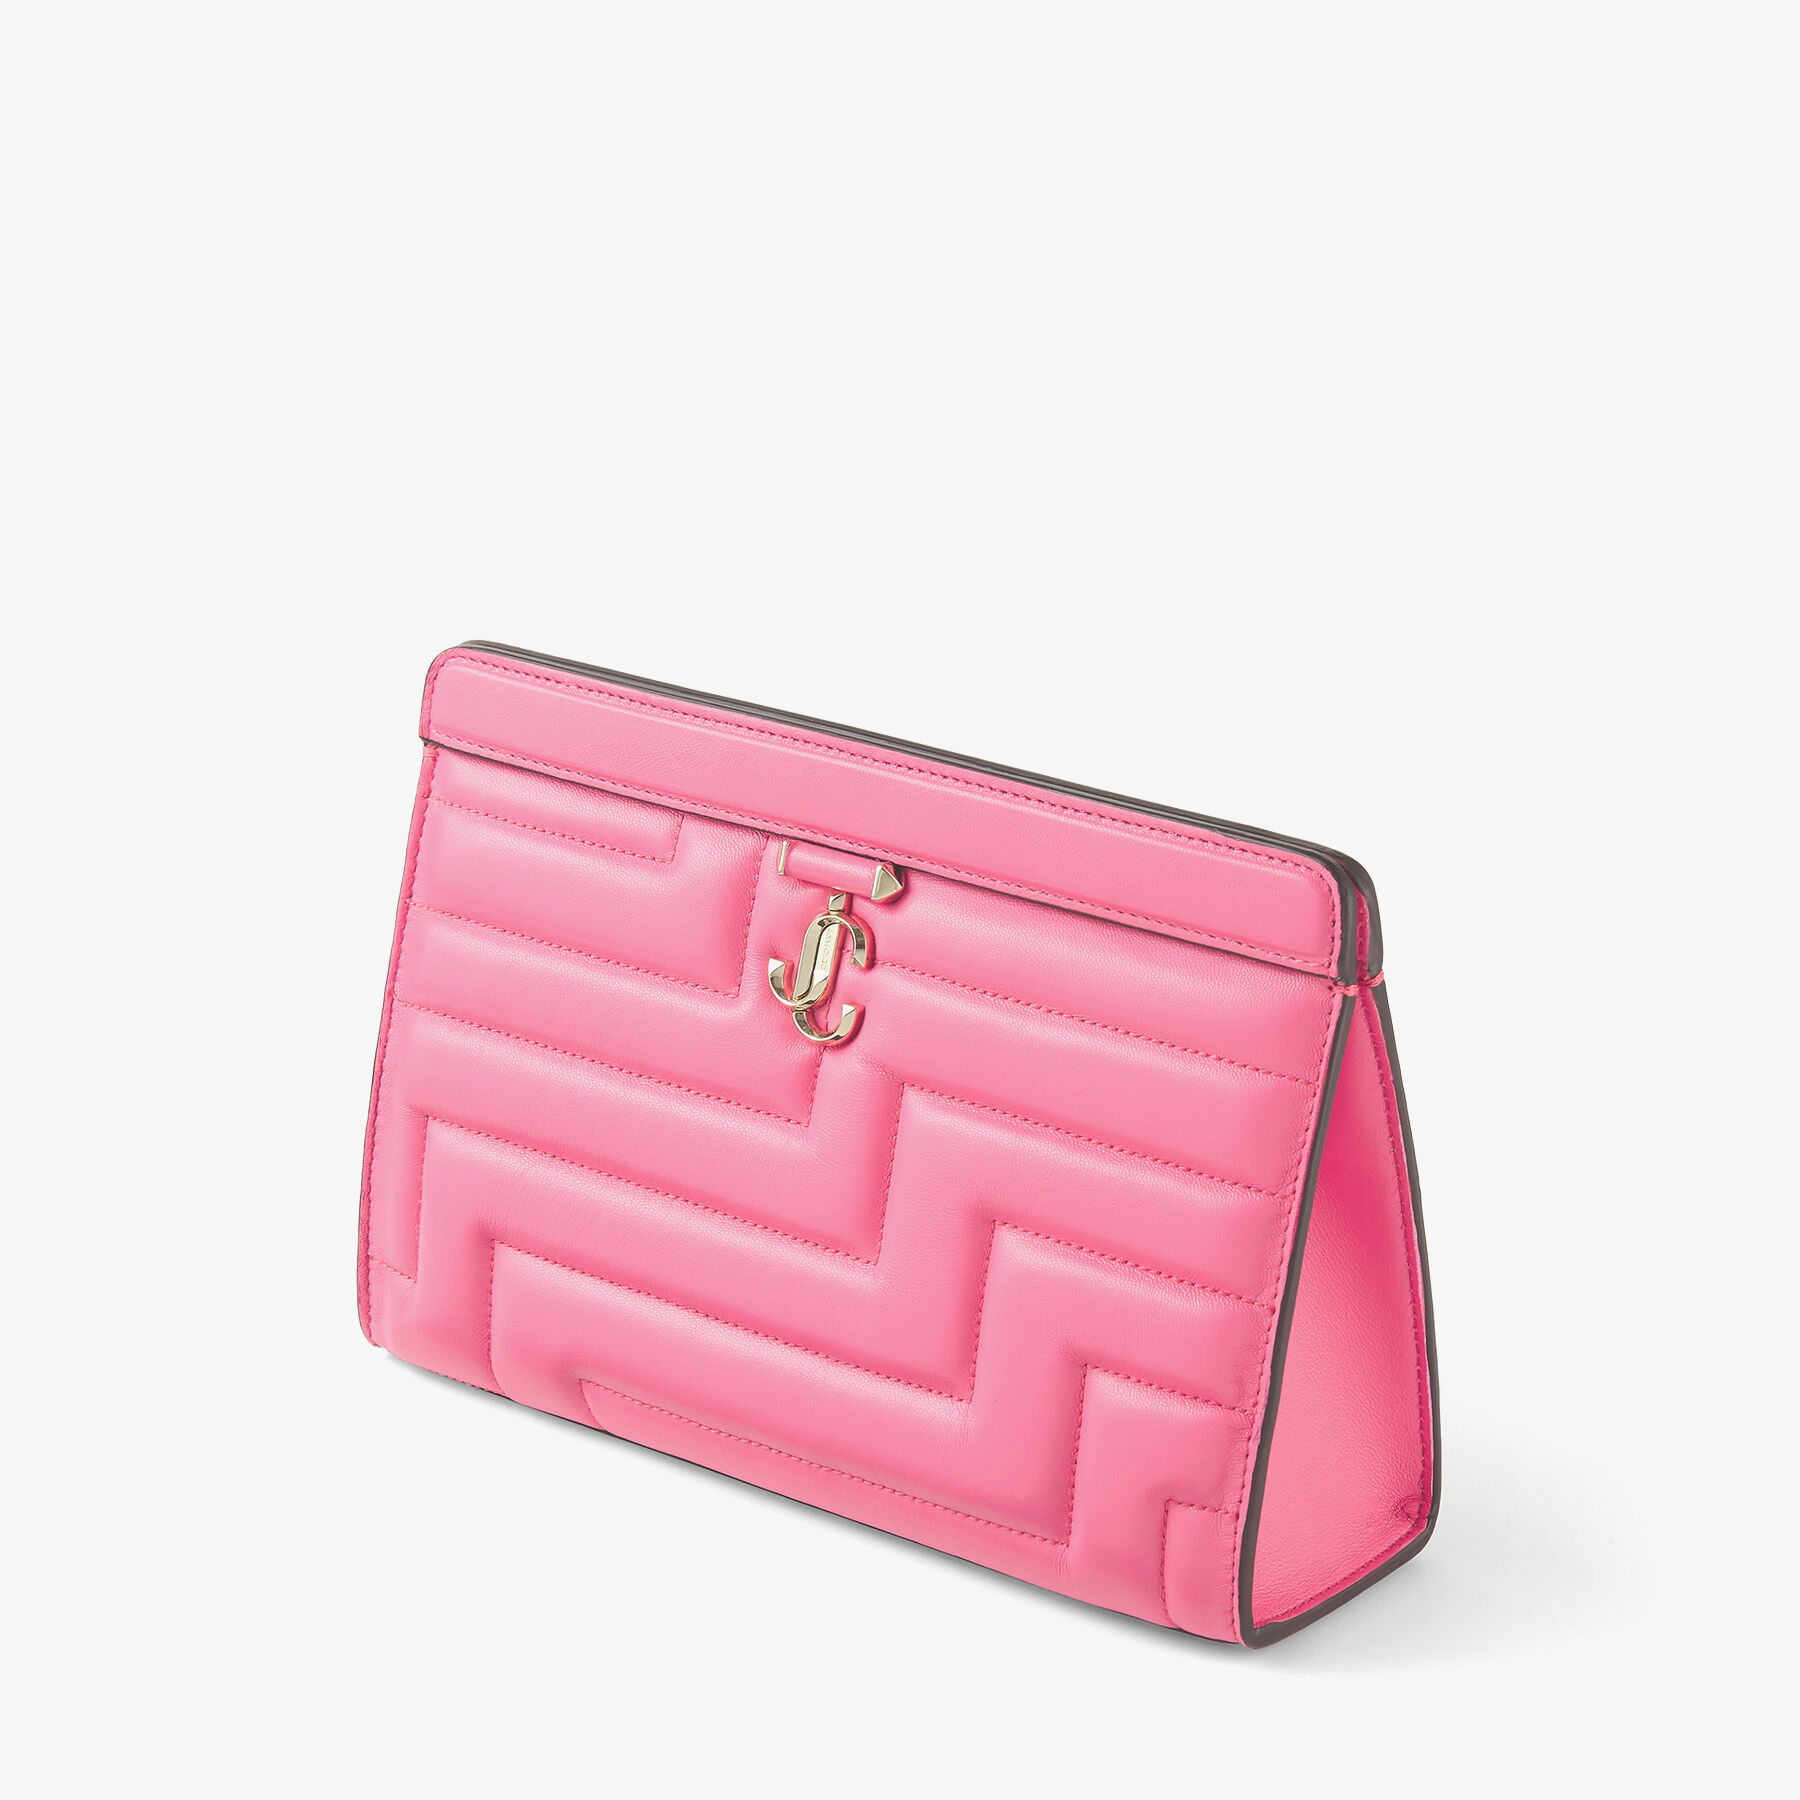 Candy Pink Avenue Nappa Leather Pouch Bag with Light Gold JC Emblem ...